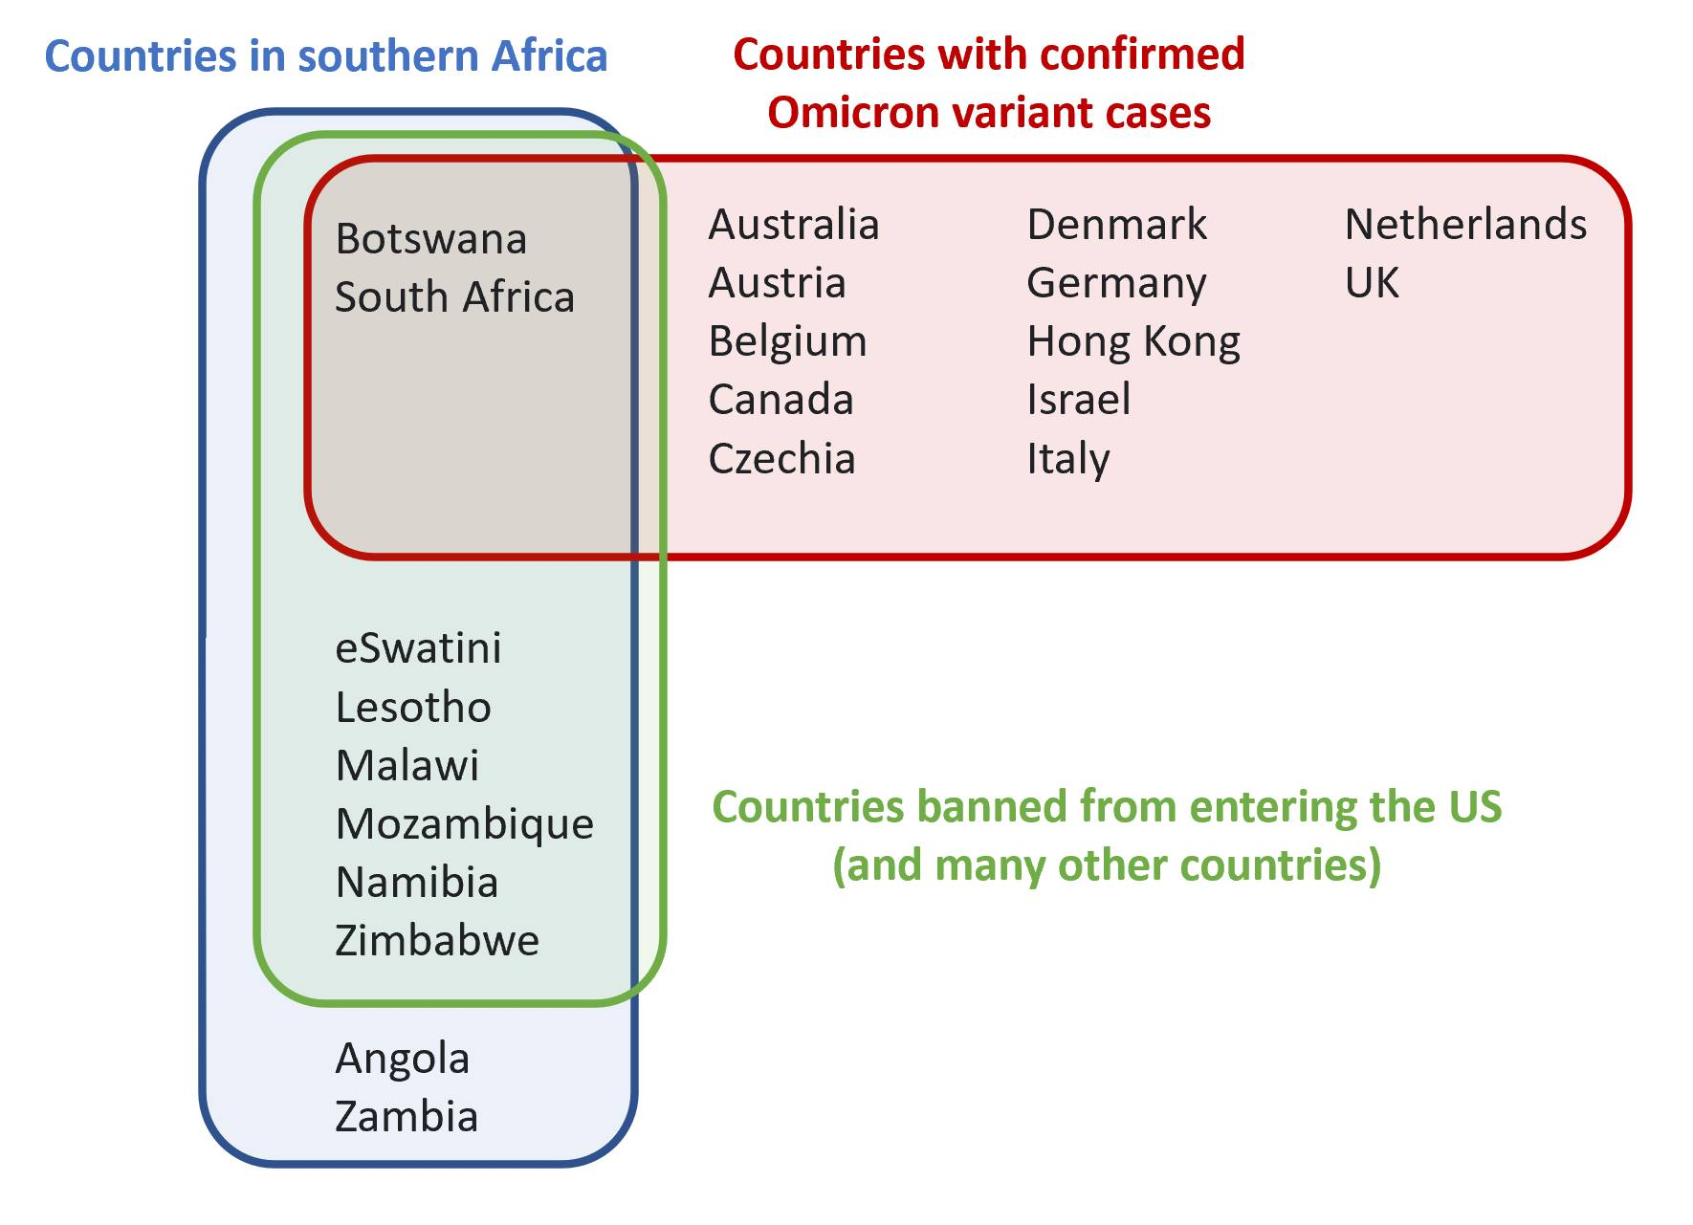 An infographic showing the separation and overlap of 'Countries in southern Africa (blue), countries with confirmed OMicron variant cases (red), and countries banned from entering the US (and many other countries) (green)', demonstrating that plenty of countries outside of southern Africa have confirmed cases but are not banned.